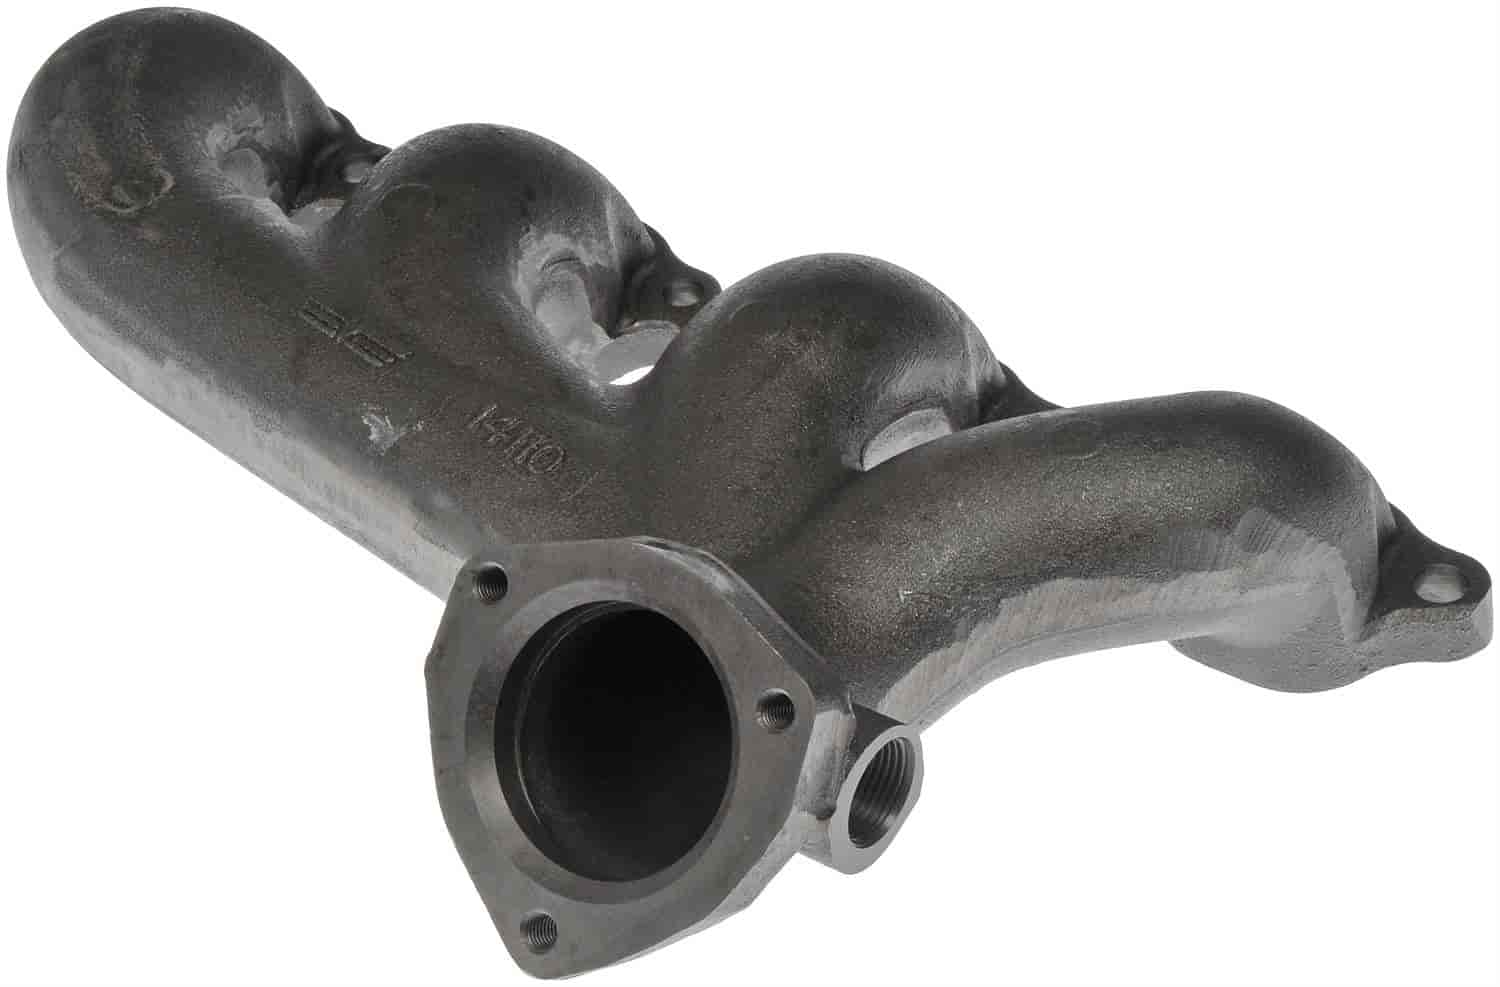 Exhaust Manifold kit - Includes Required Gaskets And Hardware